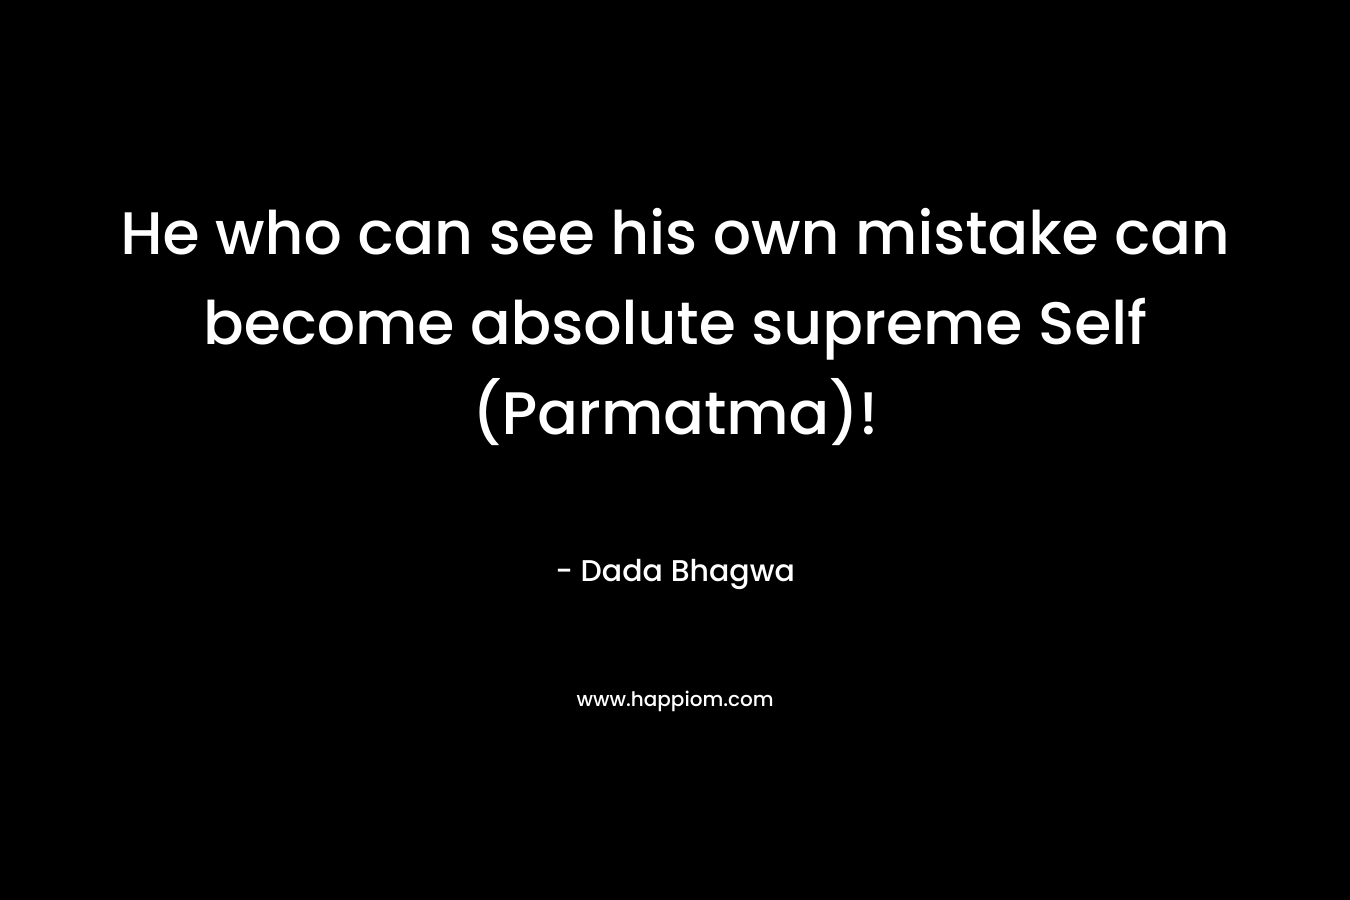 He who can see his own mistake can become absolute supreme Self (Parmatma)! – Dada Bhagwa